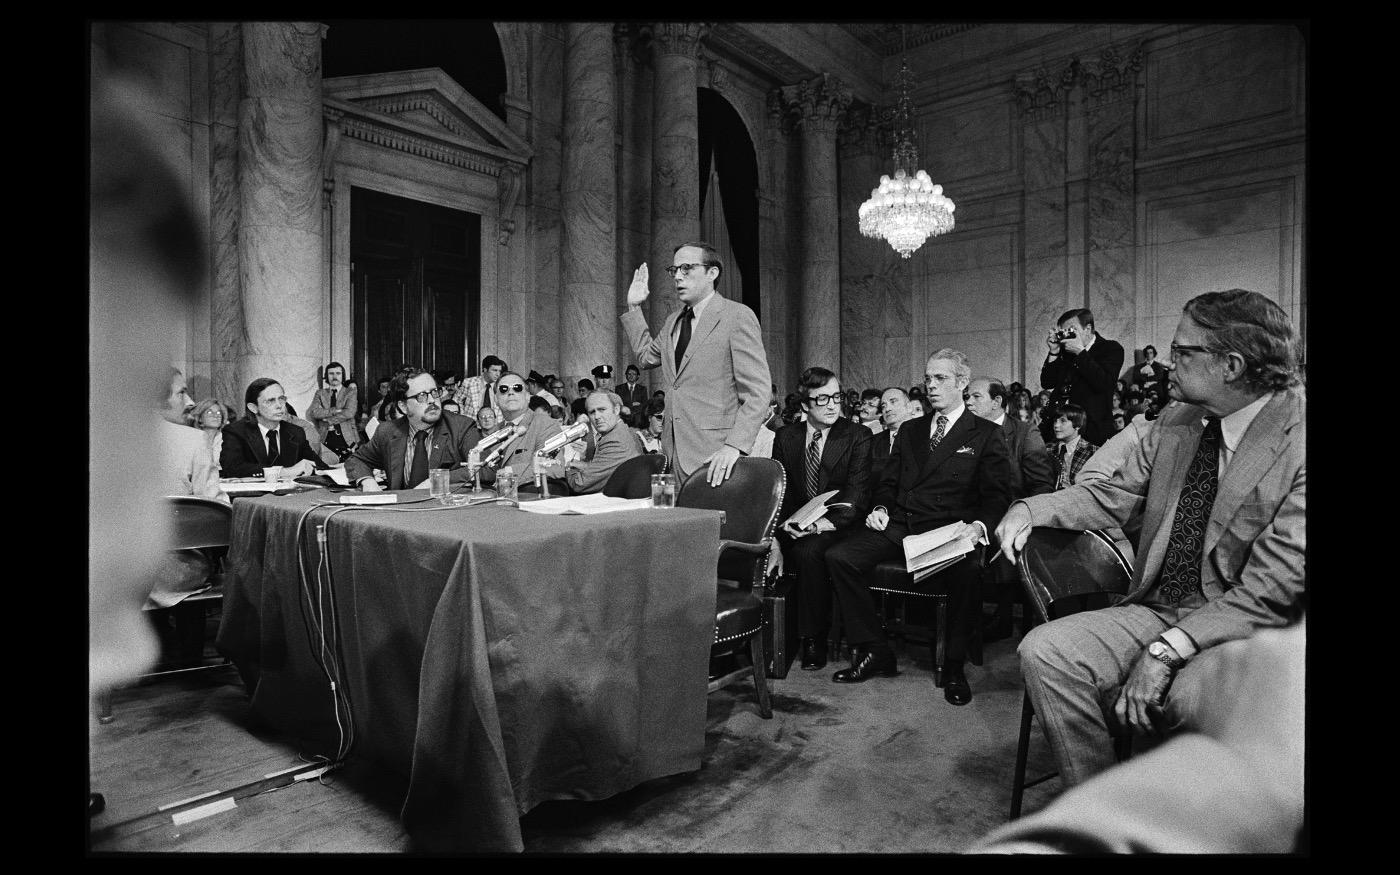 Former Presidential counsel John Dean being sworn in at the Watergate Hearings
1973 : Looking Back: 60 Years of Photographs : David Burnett | Photographer